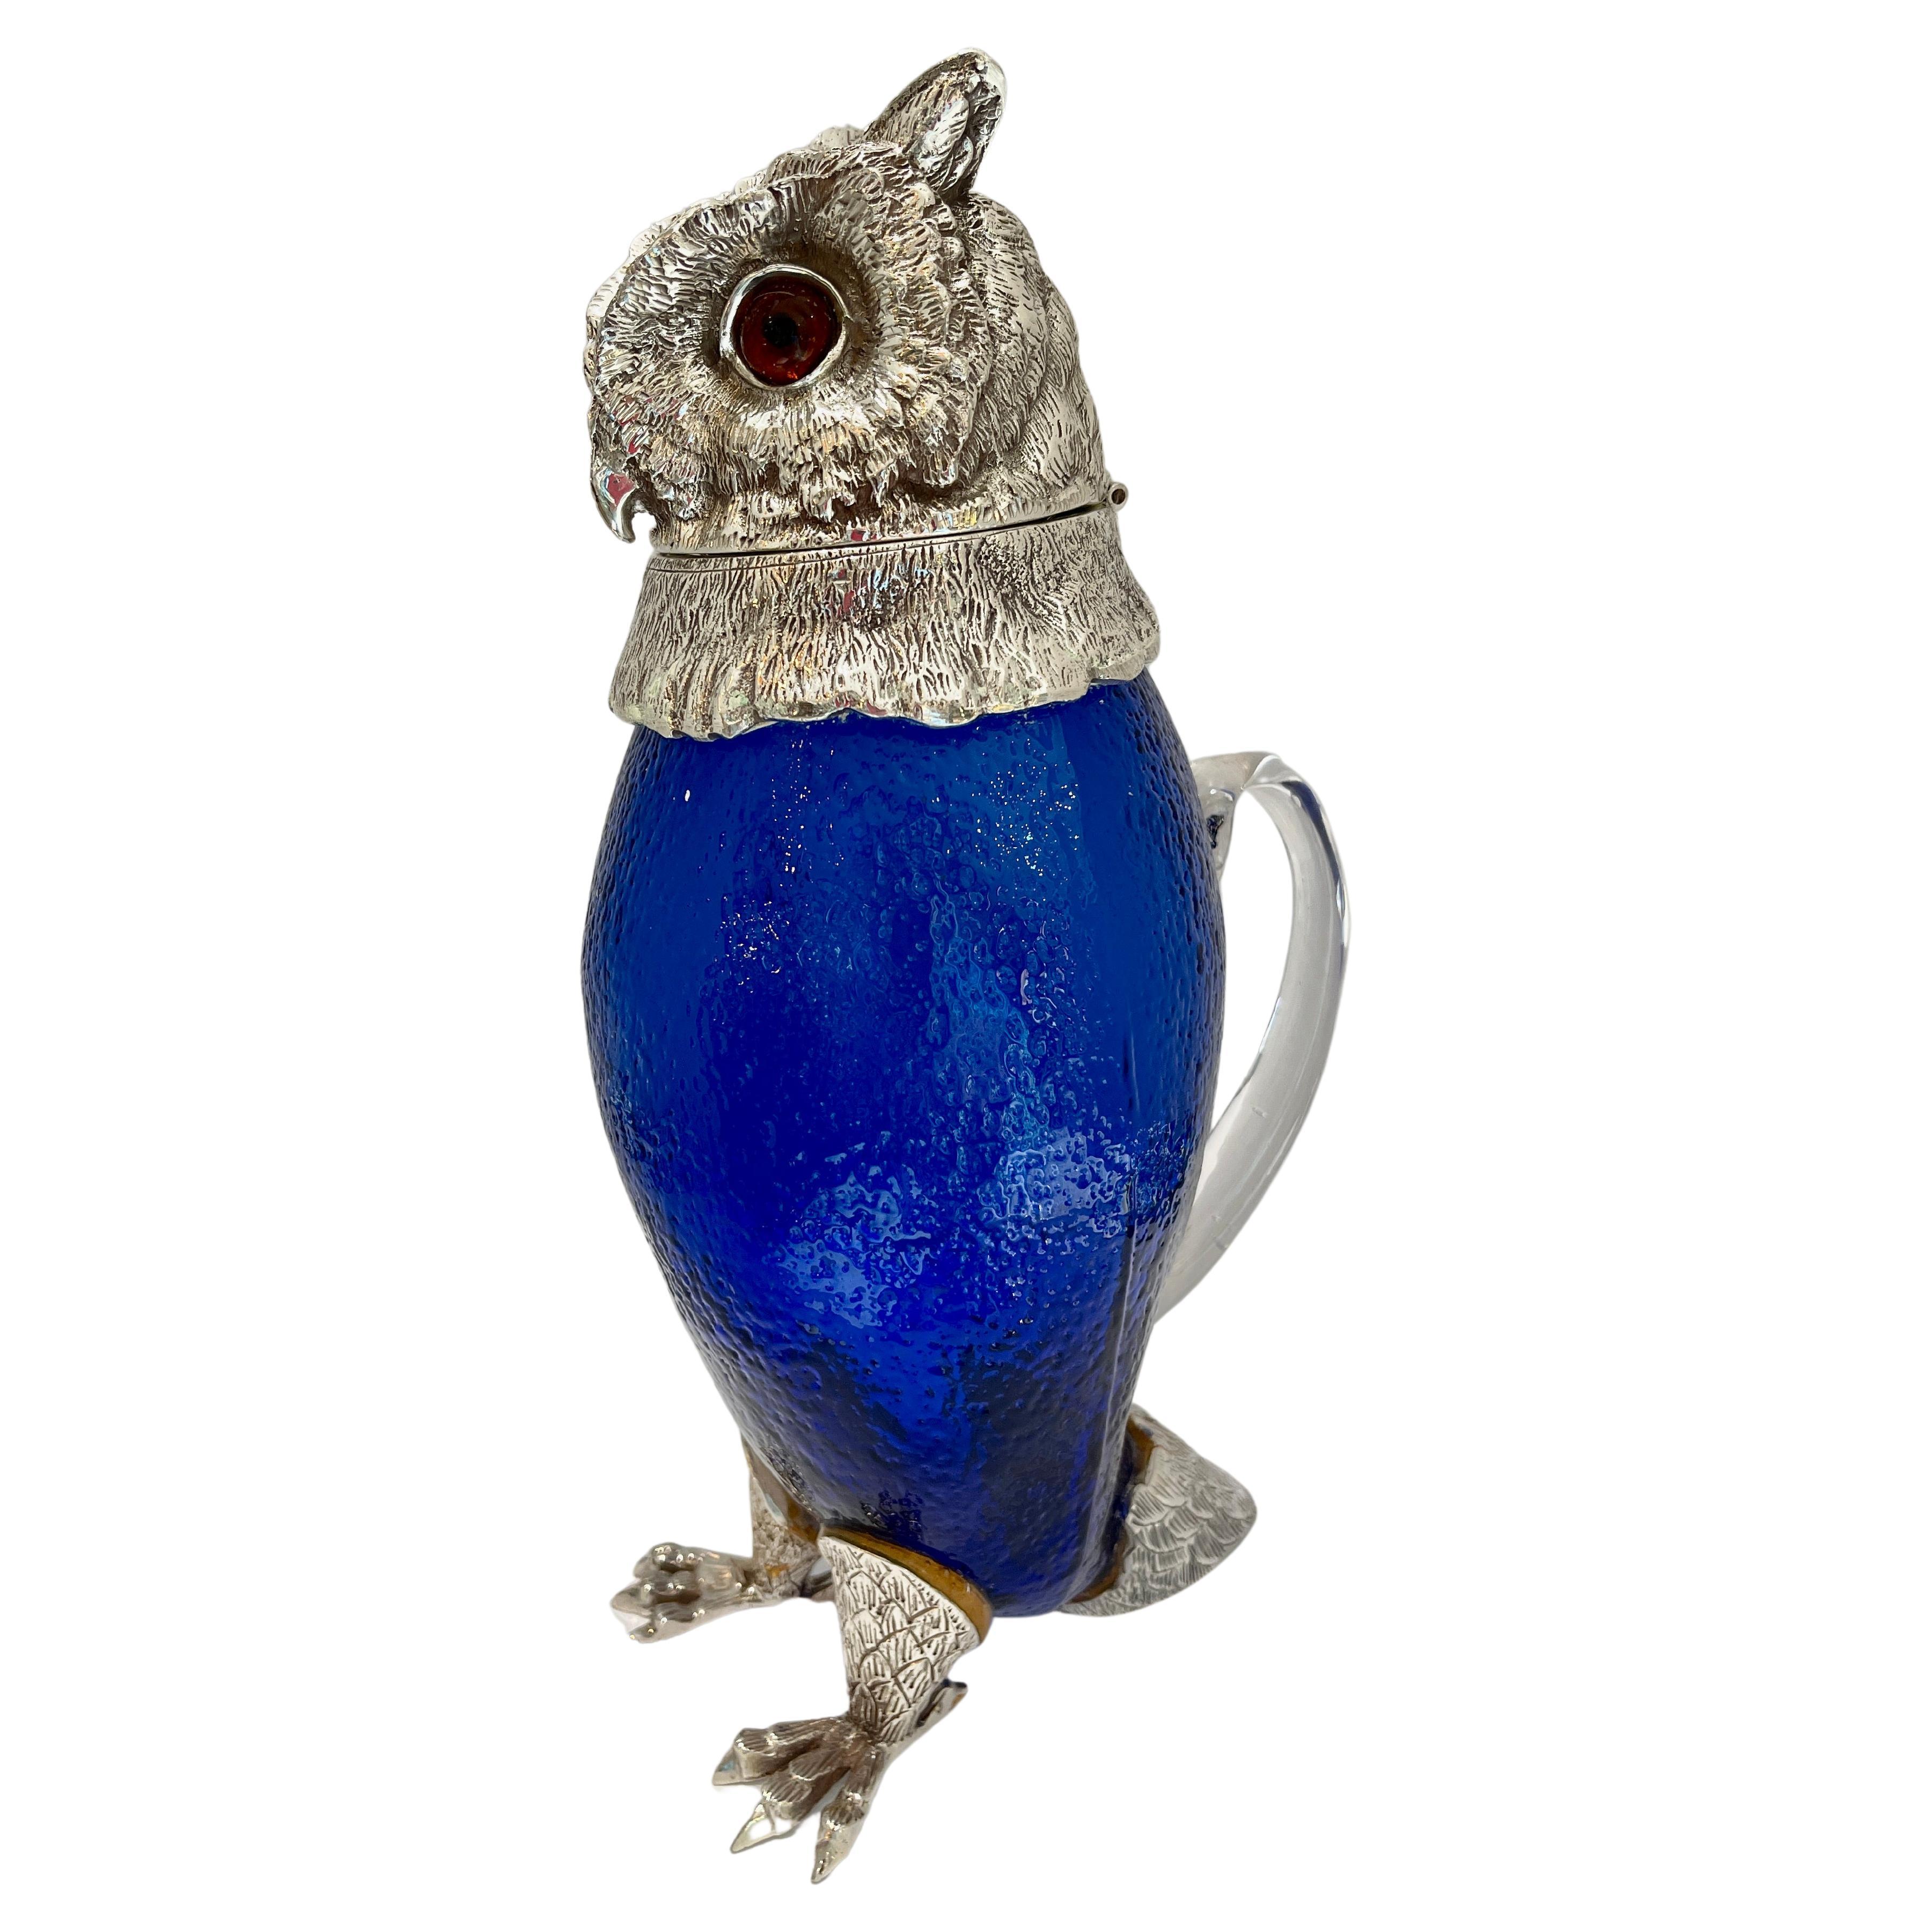 Novelty Silver Plate and Cobalt Blue Glass Owl Claret Jug Decanter 20Th C. For Sale